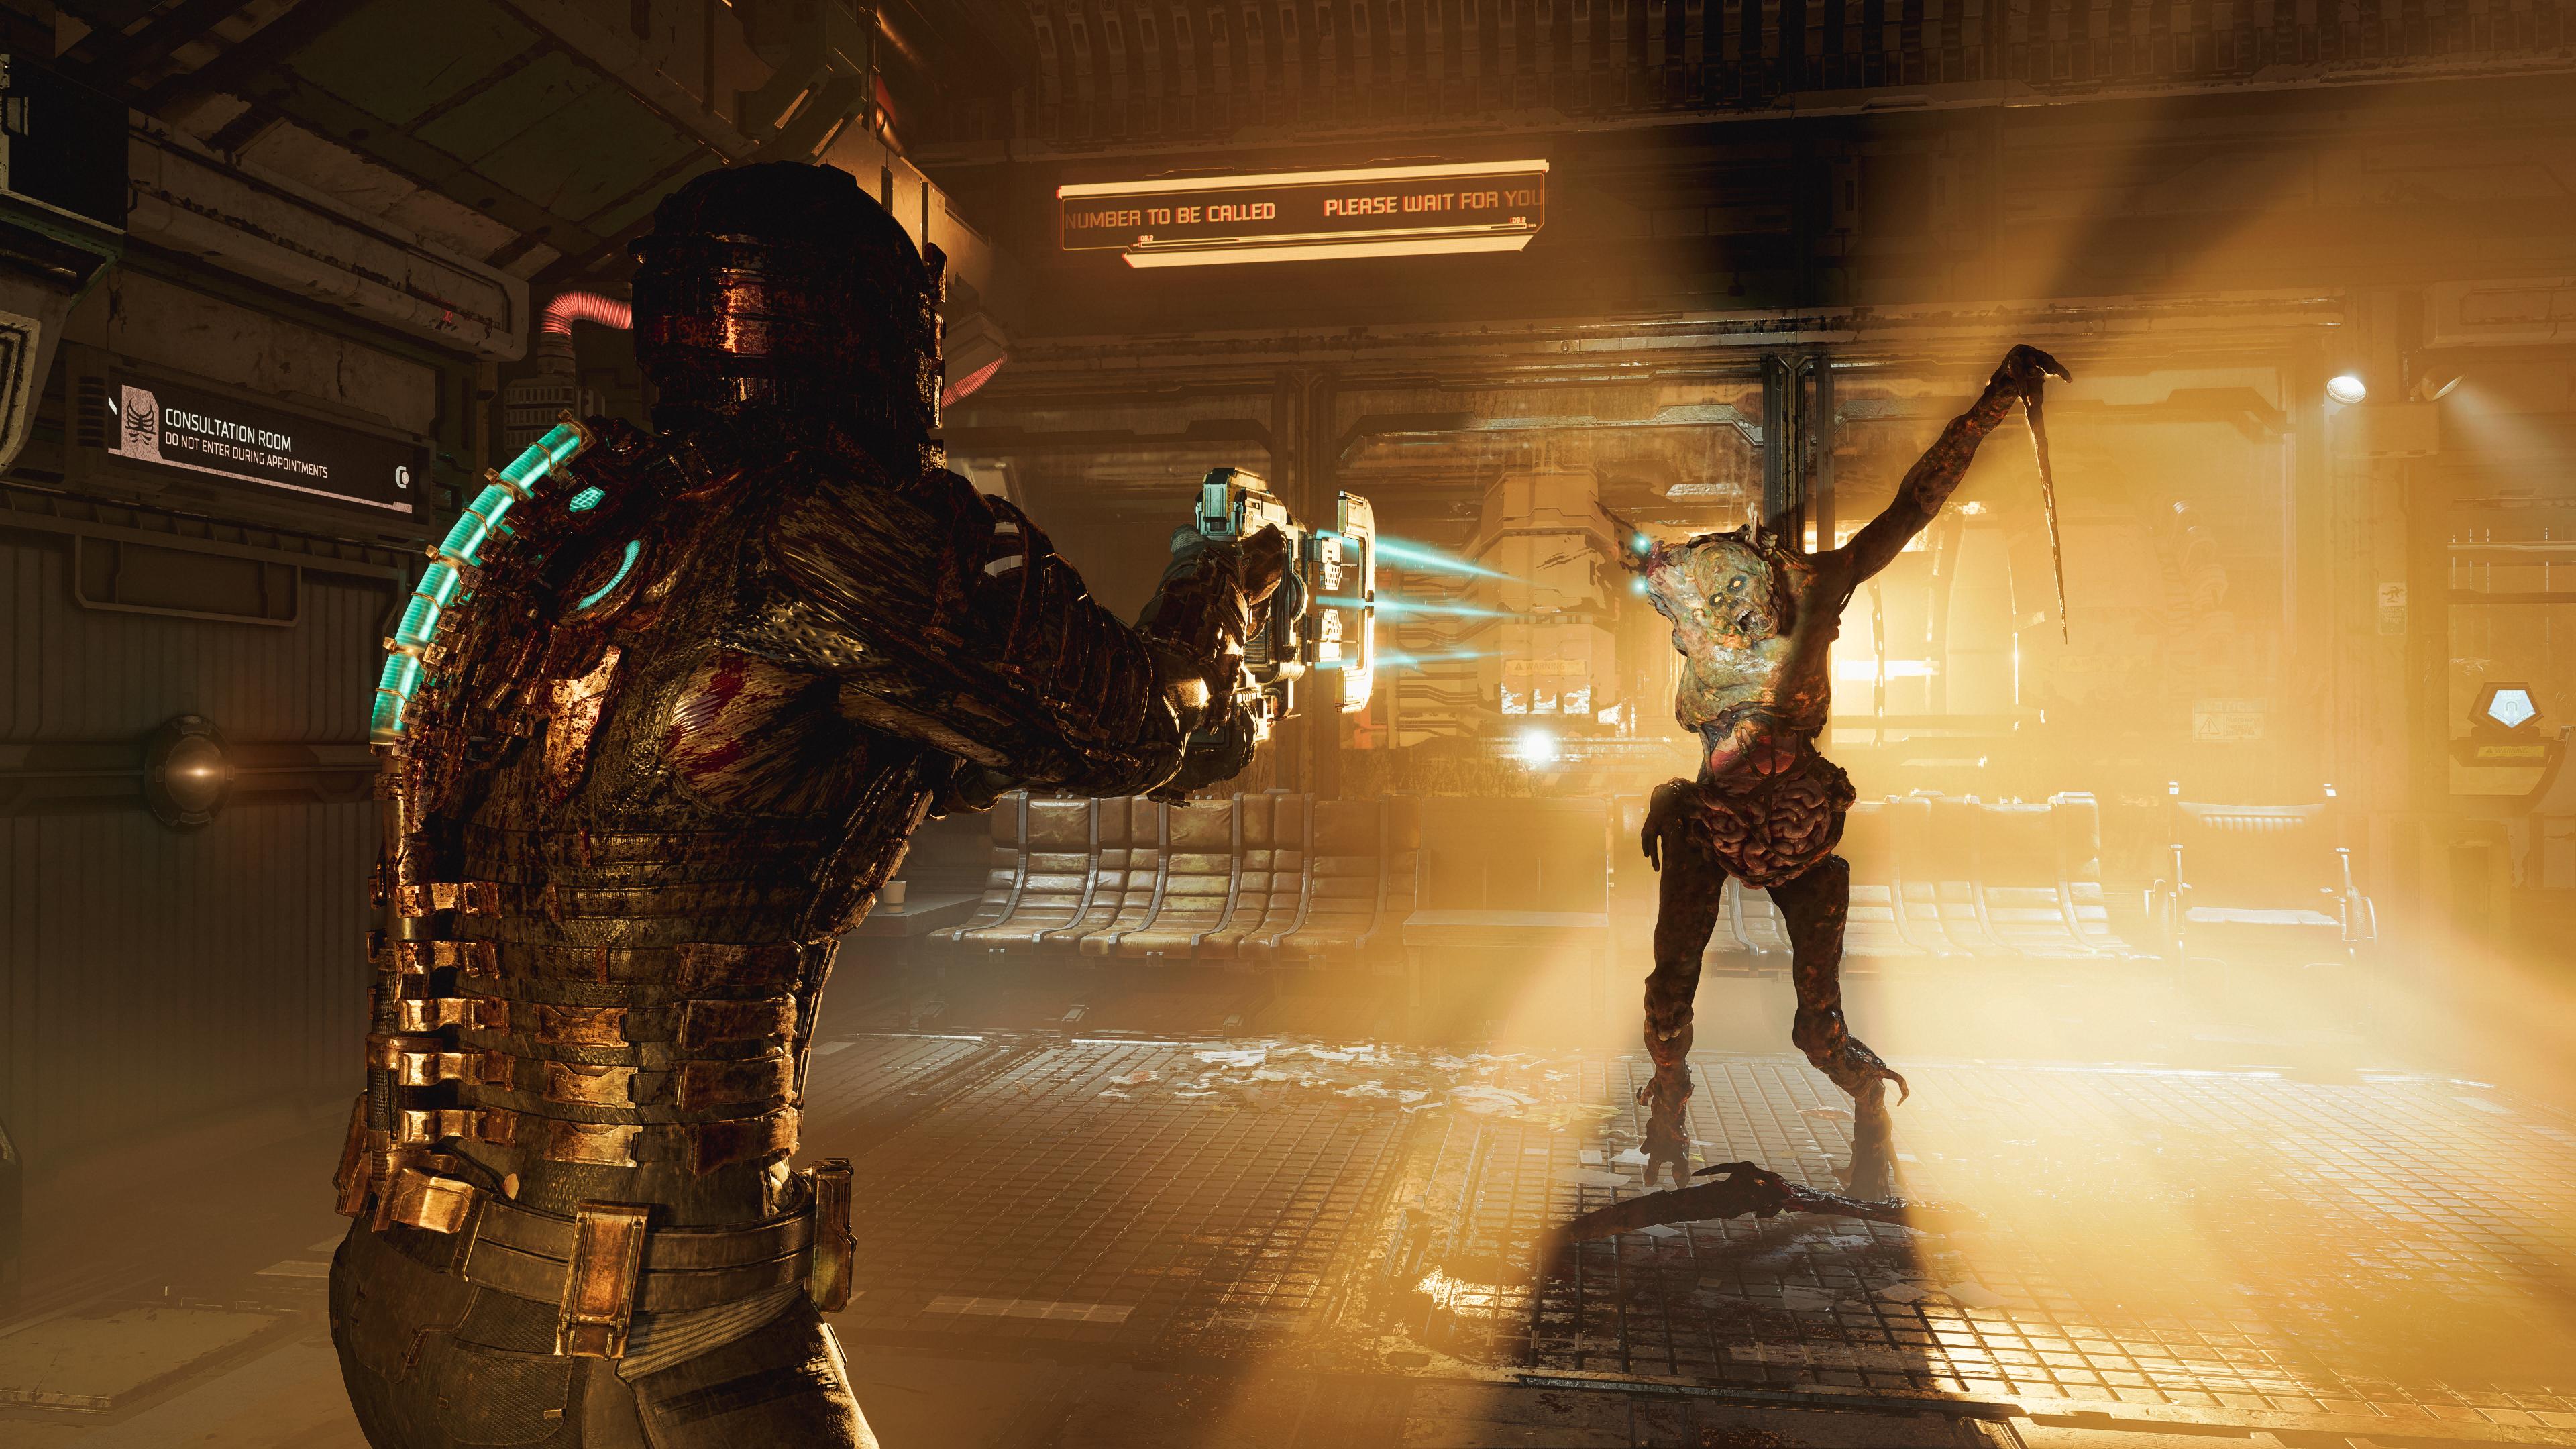 Dead Space' hands-on: Gruesome sci-fi horror has never felt so comforting | Engadget